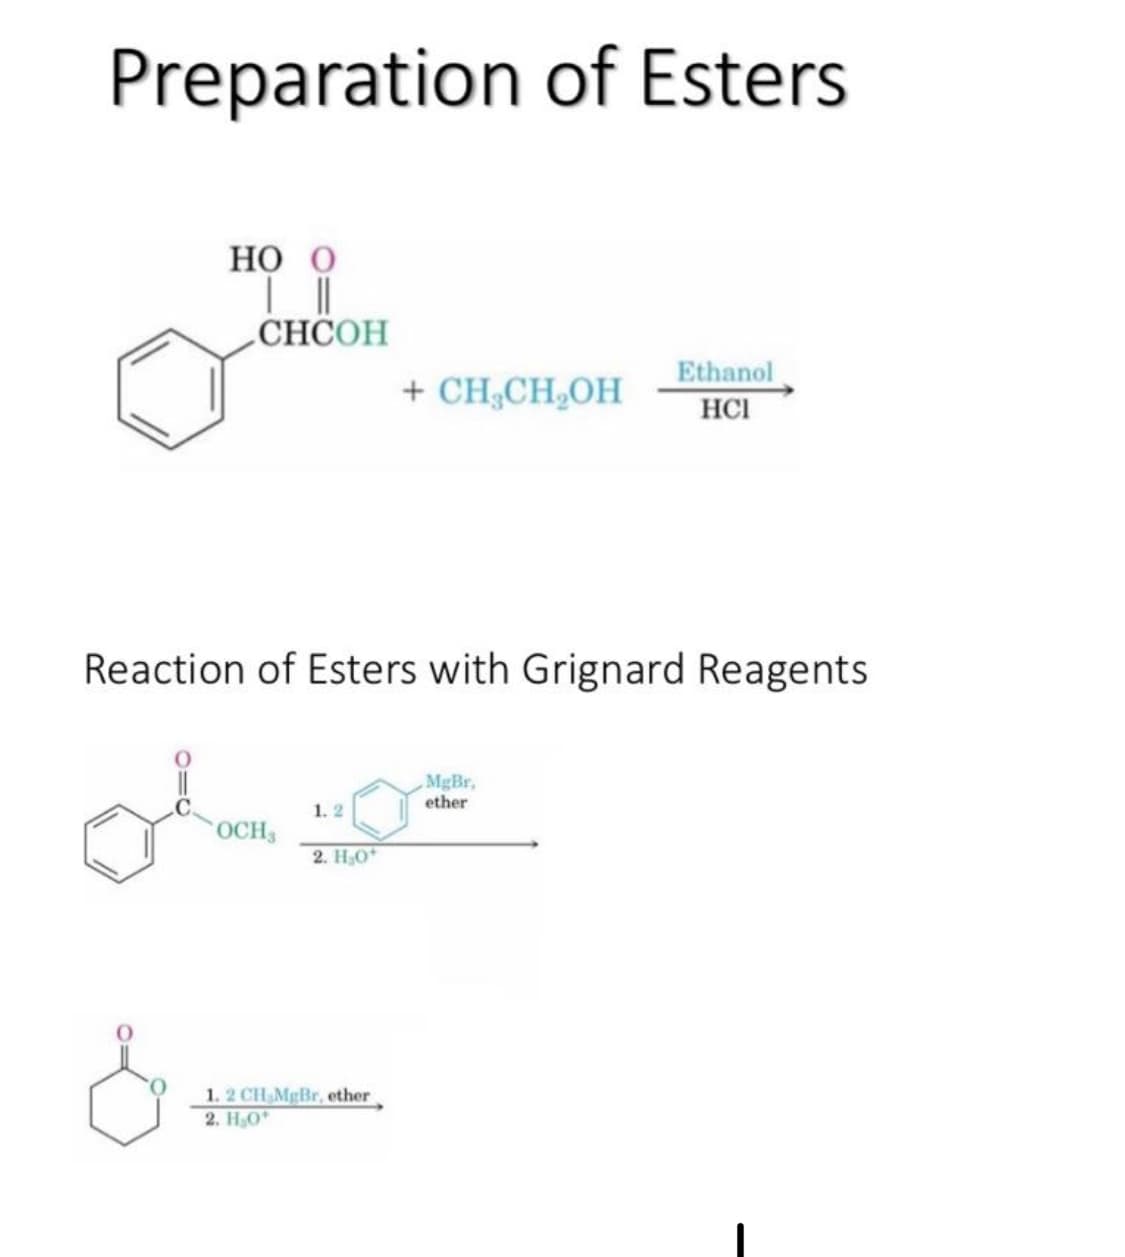 Preparation of Esters
но о
СНСОН
+ CH CH,OH
Ethanol
HCI
Reaction of Esters with Grignard Reagents
MgBr,
ether
1. 2
OCH3
2. HO*
1. 2 CH MgBr, ether
2. H,0
